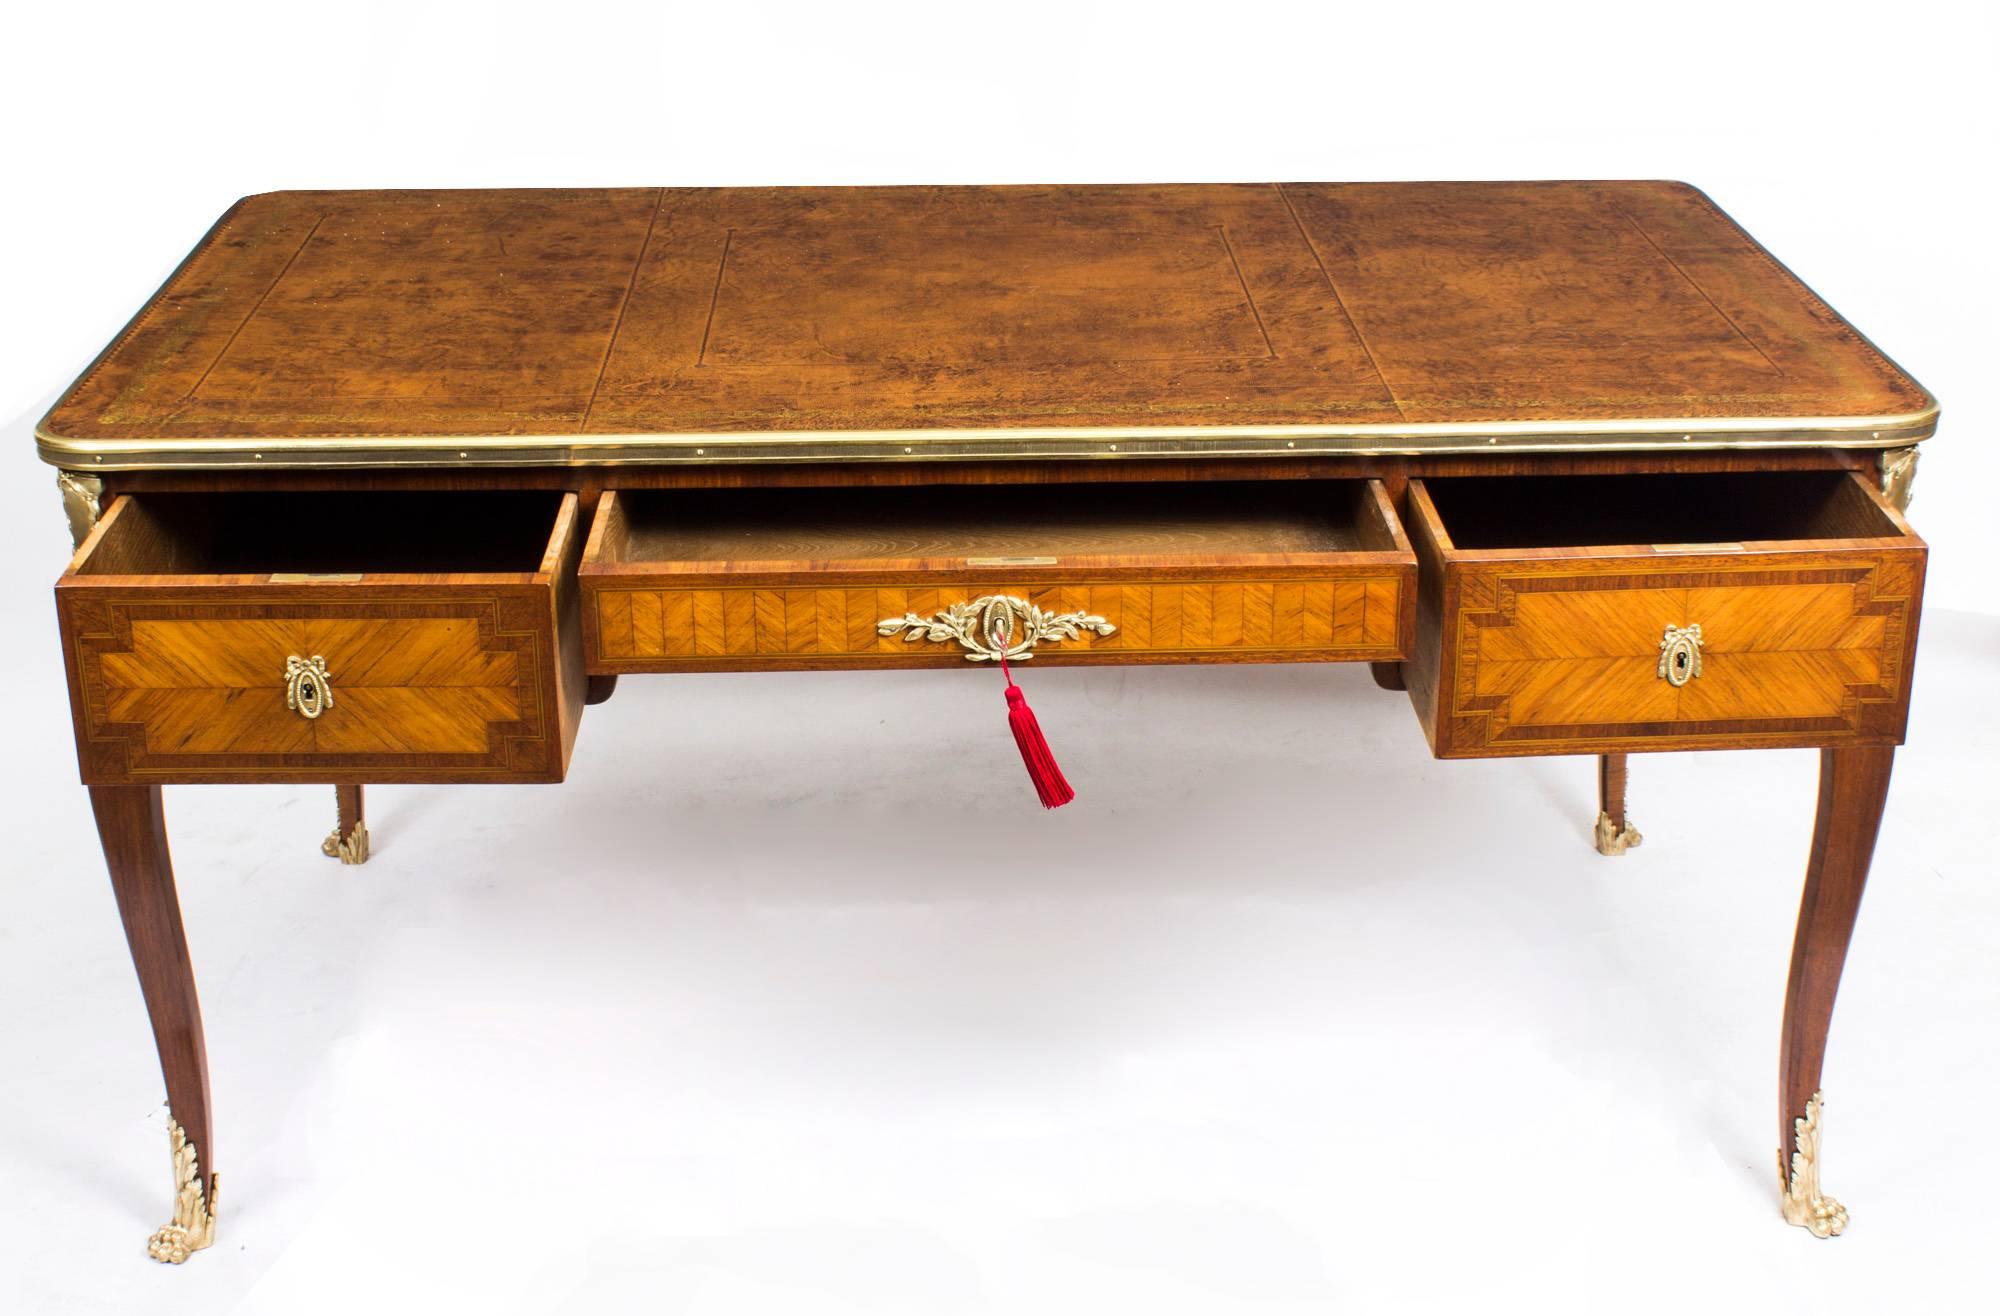 This is a elegant antique French walnut bureau plat with decorative ormolu mounts, circa 1840 in date.

The rectangular top with a beautiful gilt bronze border, raised corner cartouches and a brown leather and gold tooled inset writing surface. It